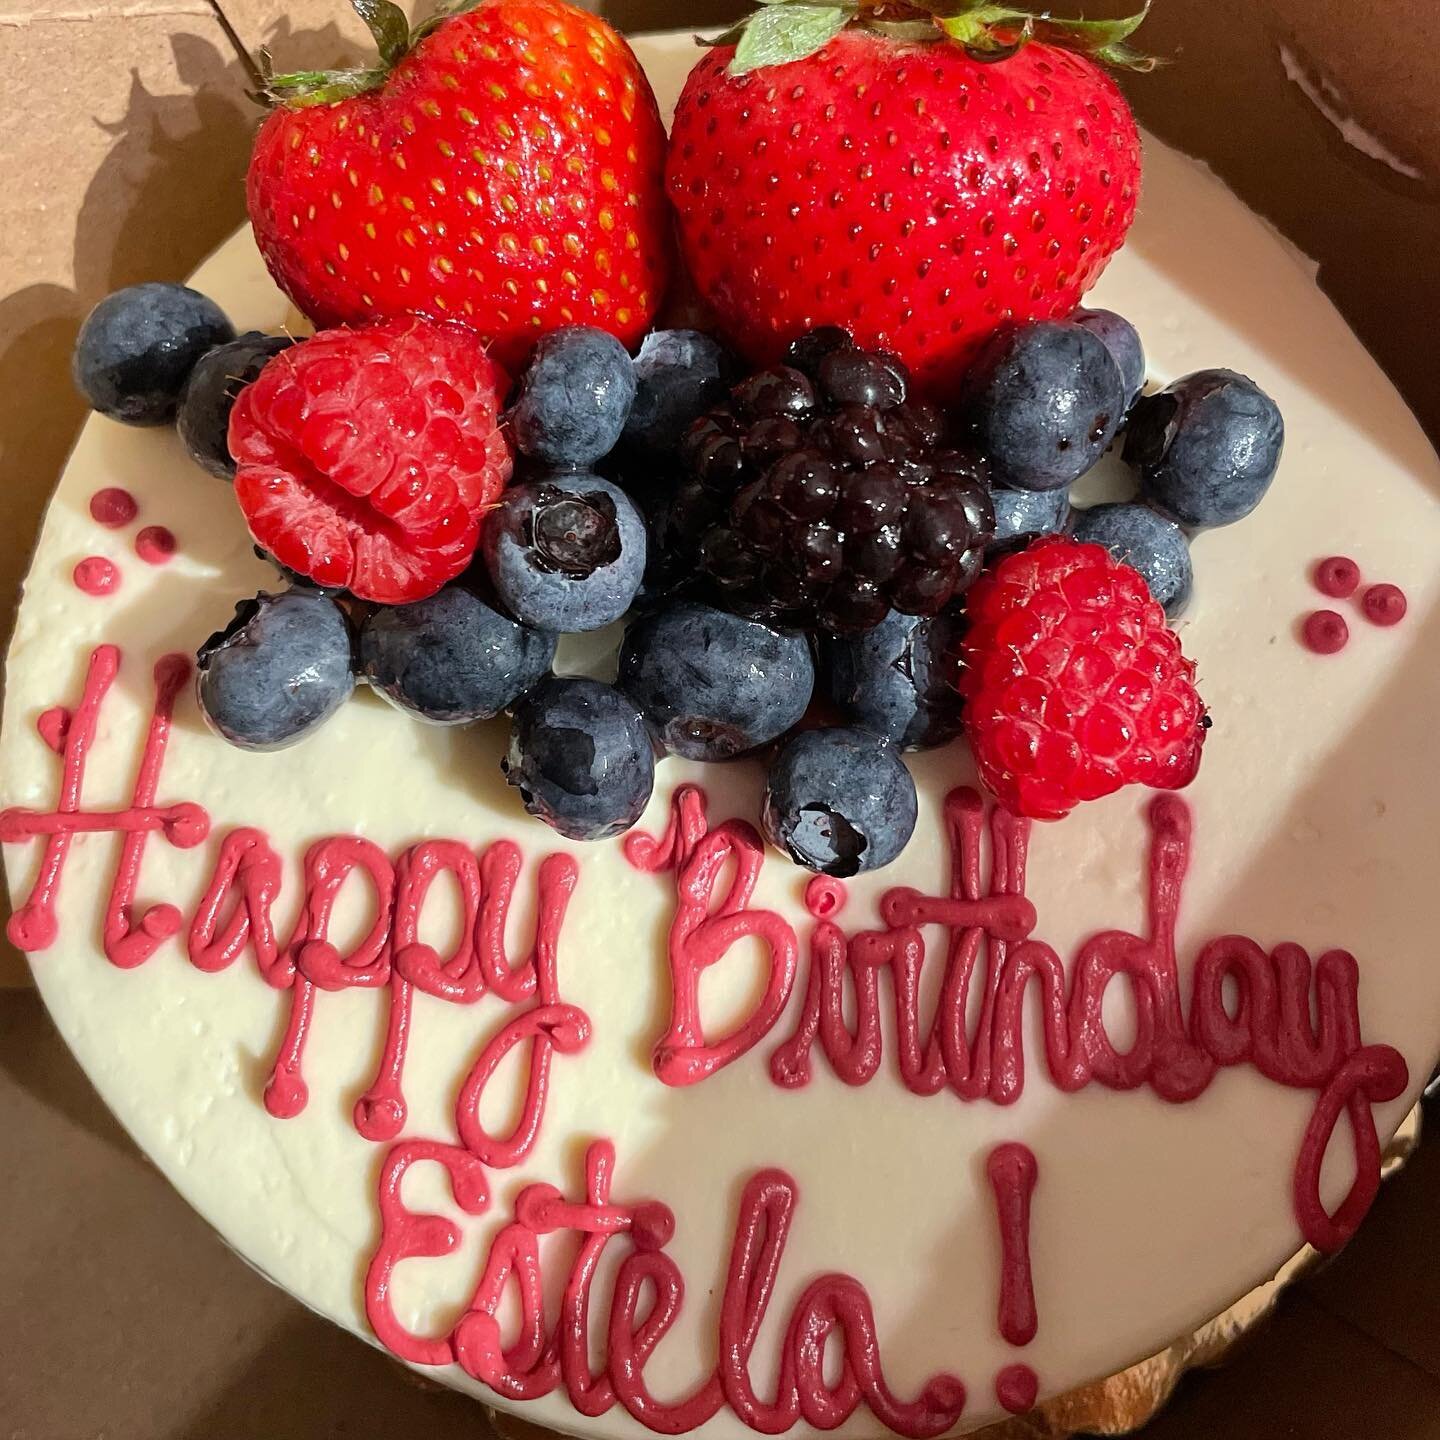 🎂 32 only happens once! Follow my special day in my stories! #birthday #32yearsold #chantillycake #berries #blackwidow